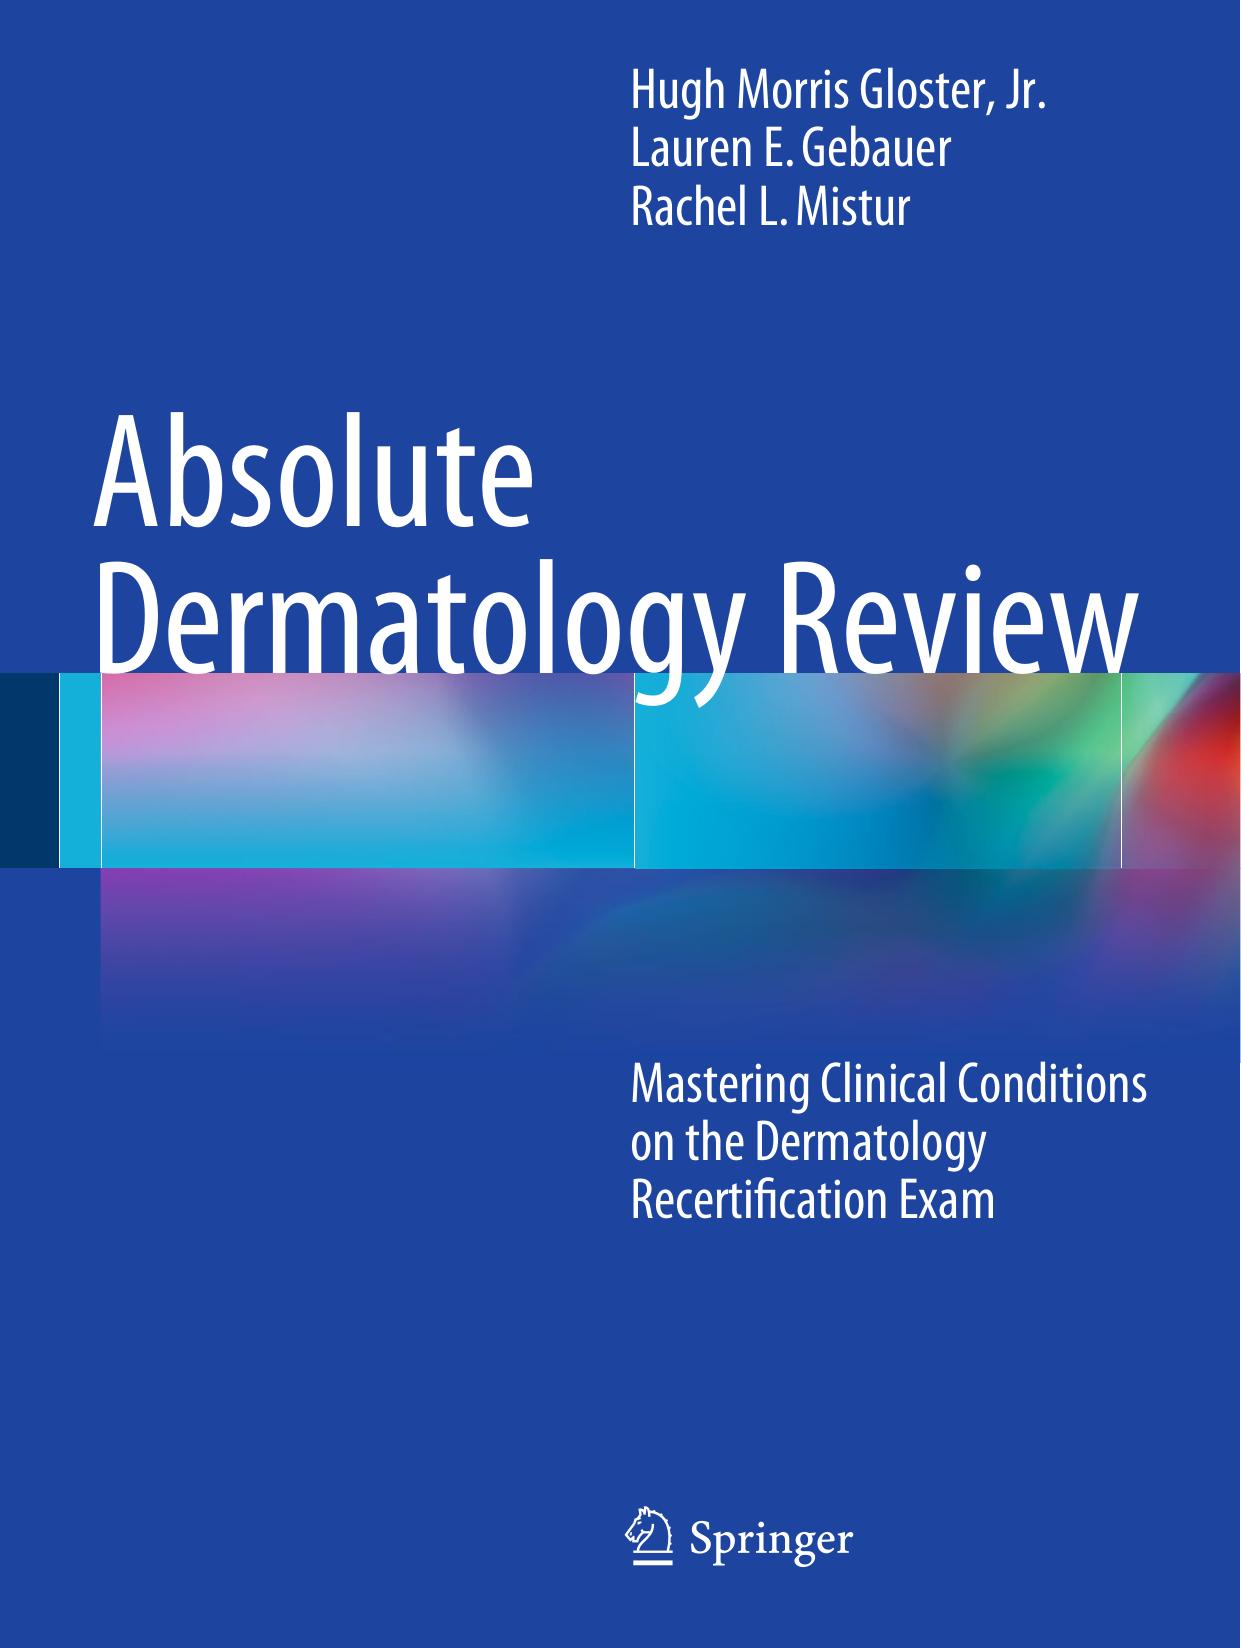 Absolute Dermatology Review  Mastering Clinical Conditions on the Dermatology Recertification Exam 2016